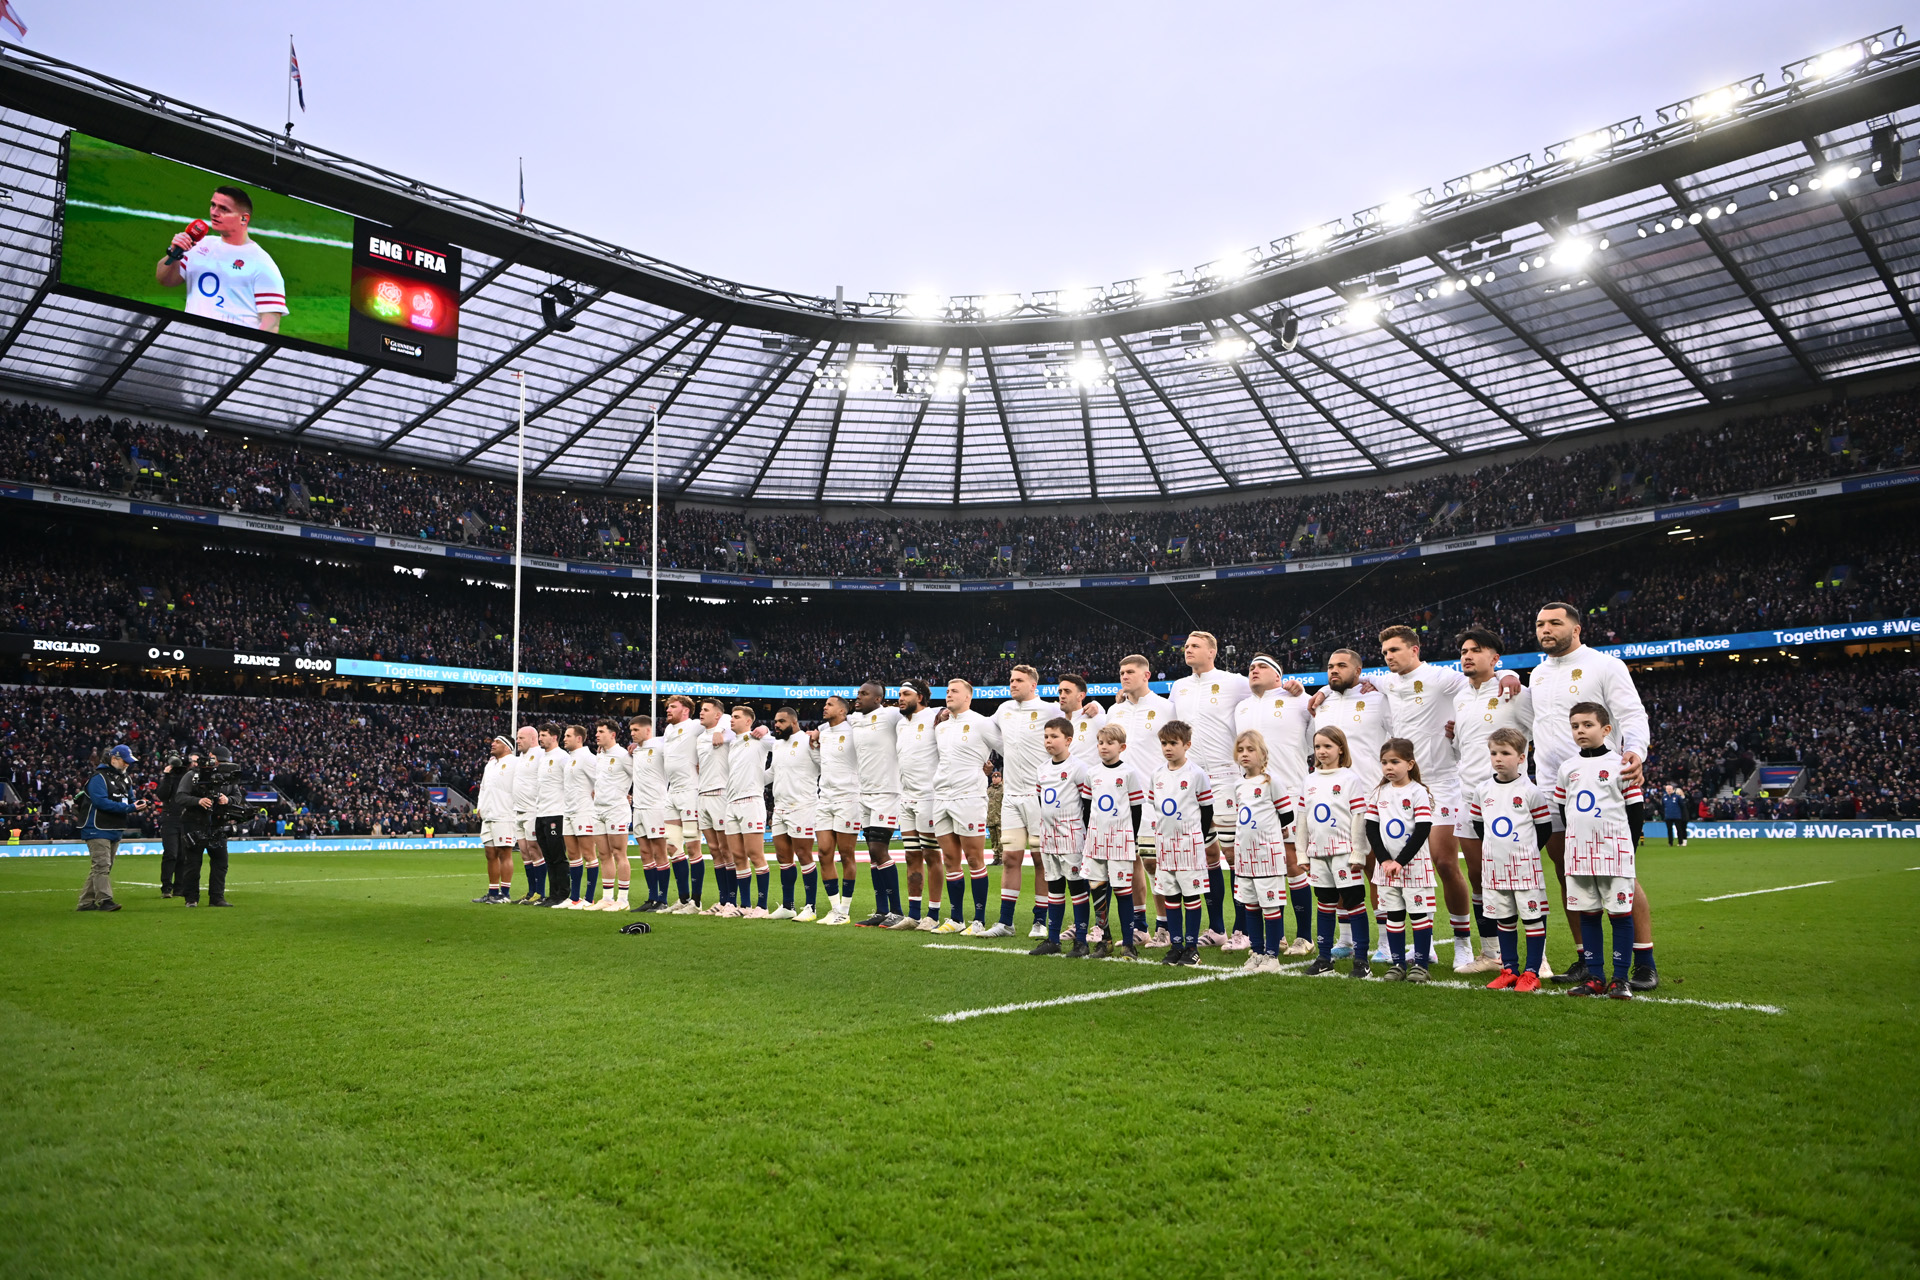 Mascots during the Six Nations Rugby match between England and France at Twickenham Stadium on March 11, 2023 in London, England.